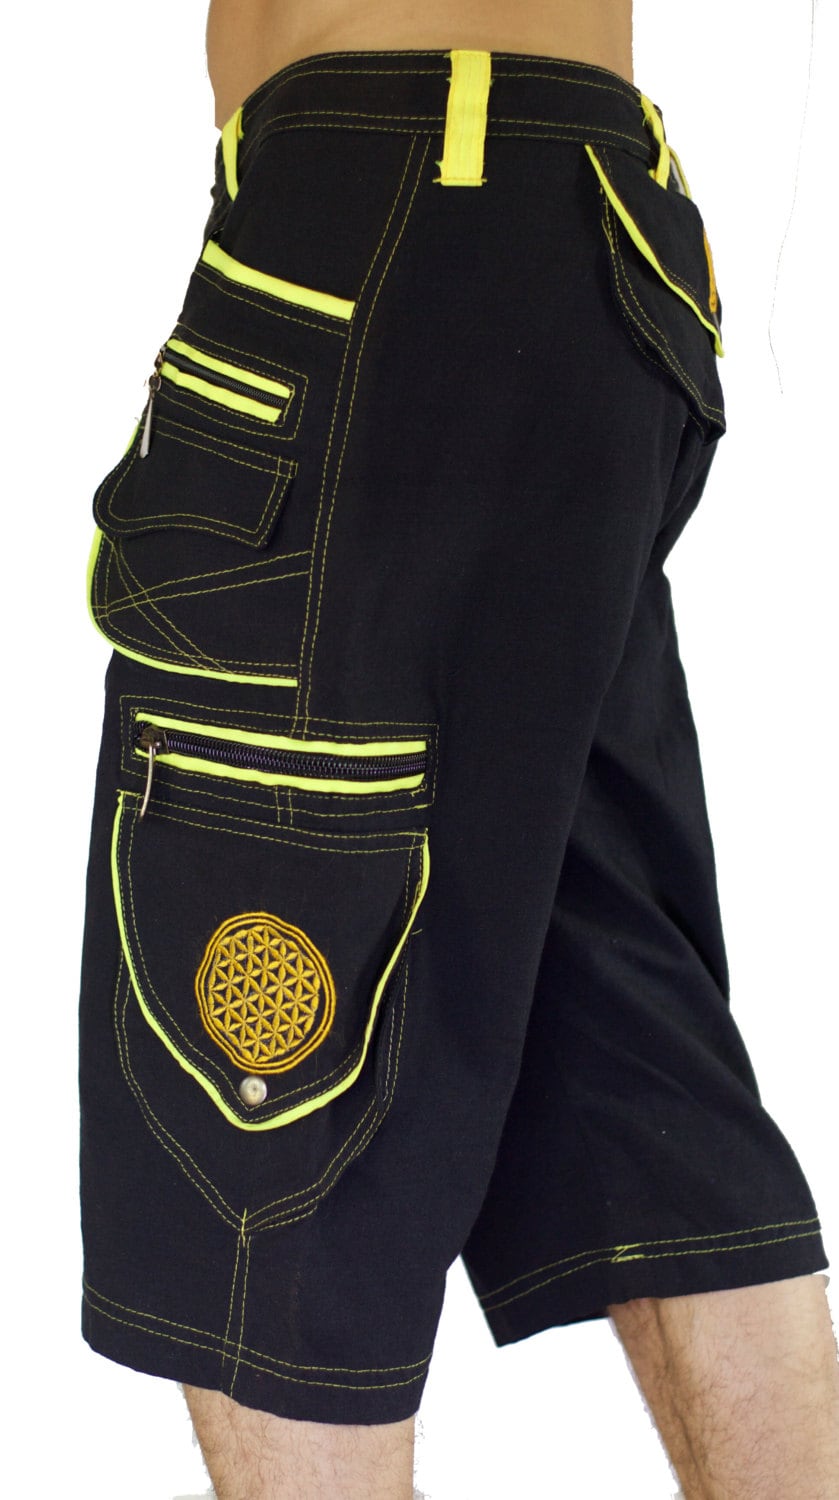 Goa Pant clamdiggers many pockets made after order fully customizable with flower of life embroidery